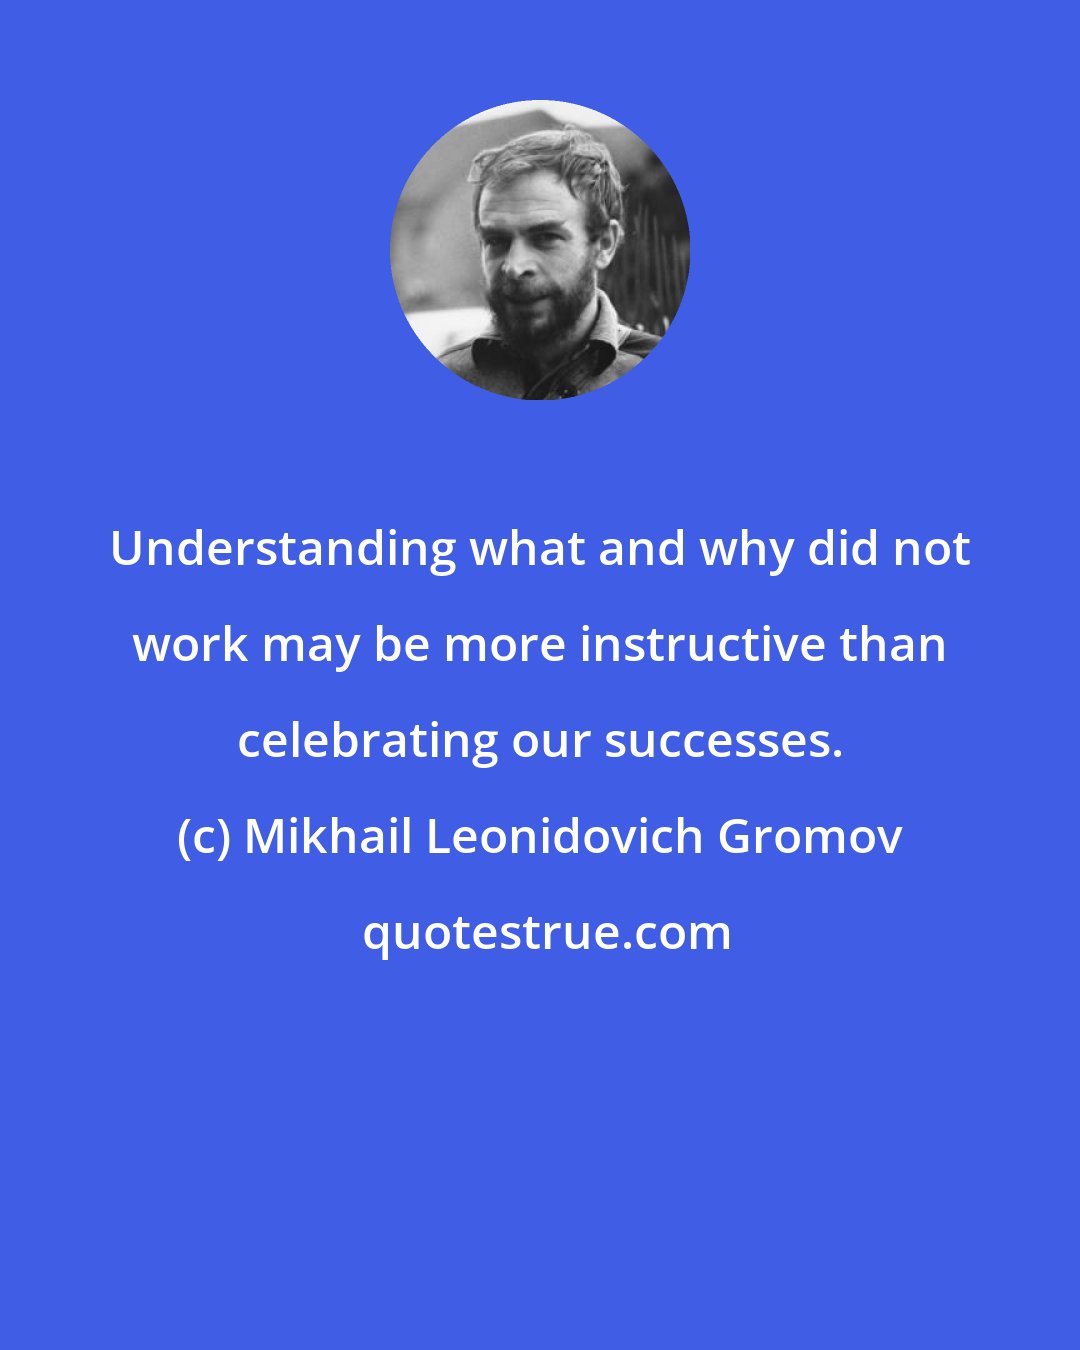 Mikhail Leonidovich Gromov: Understanding what and why did not work may be more instructive than celebrating our successes.